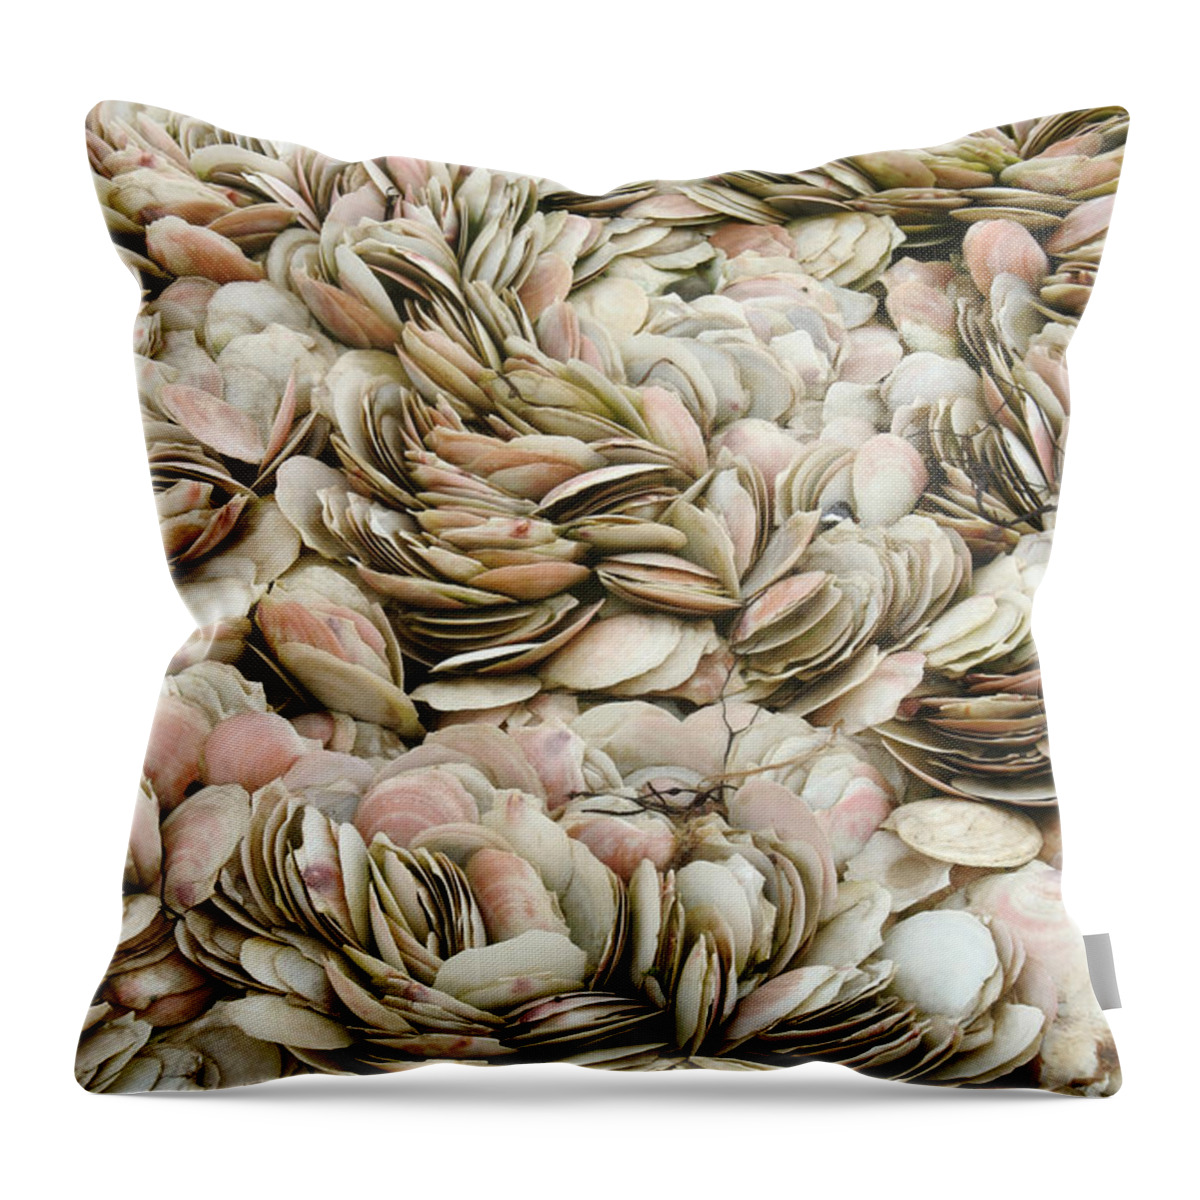 Fauna Throw Pillow featuring the photograph Scallop Shells by Ted Kinsman